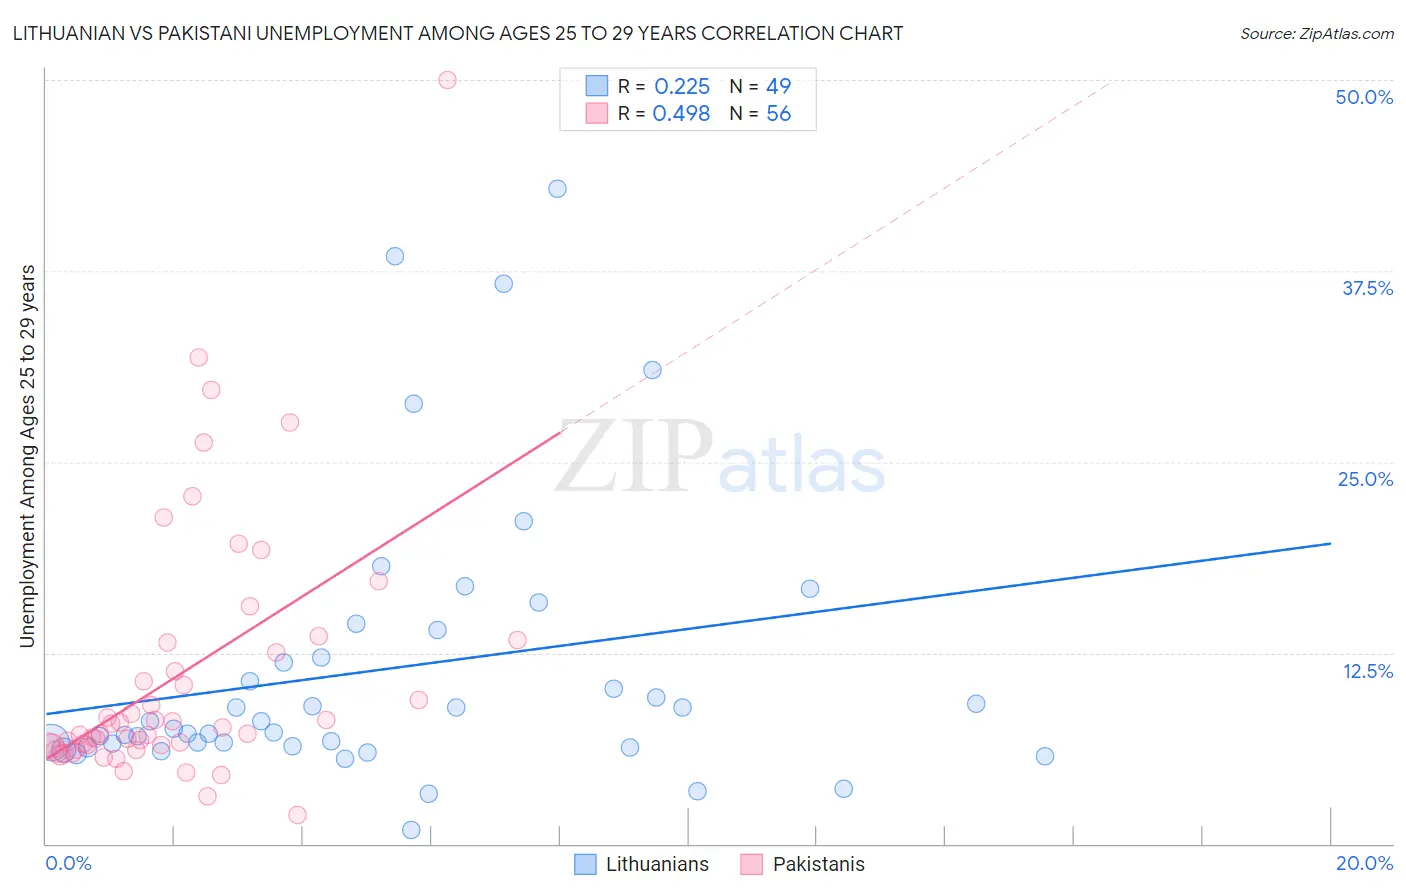 Lithuanian vs Pakistani Unemployment Among Ages 25 to 29 years